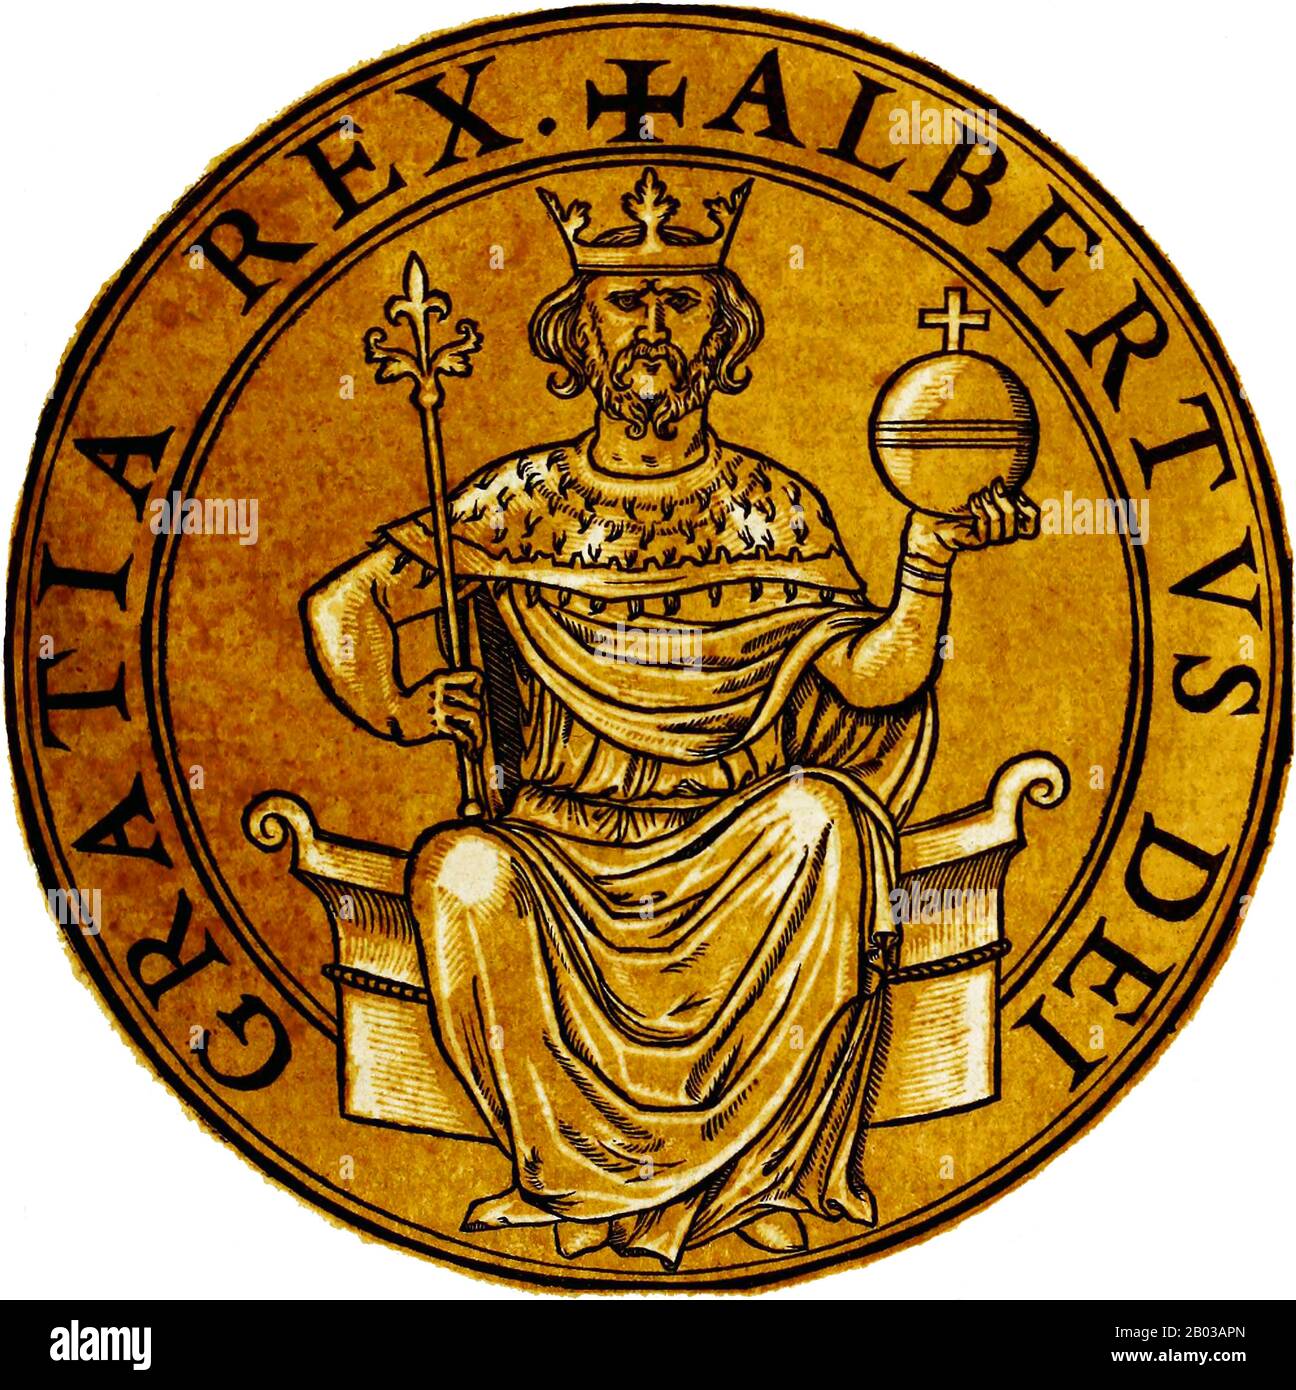 Albert I (1255-1308), also known as Albert of Habsburg, was the eldest son of King Rudolf I, and was made landgrave of Swabia in 1273, looking over his father's possessions in Alsace. He was then made Duke of Austria and Styria in 1283, alongside his younger brother Rudolf II. When his father died without managing to secure Albert's election as successor, he was forced to recognise the sovereignty of the elected King Adolf of Nassau.  Albert did not abandon his hopes for the German crown however, biding his time and working with Adolf's enemies and former allies to eventually have him deposed Stock Photo